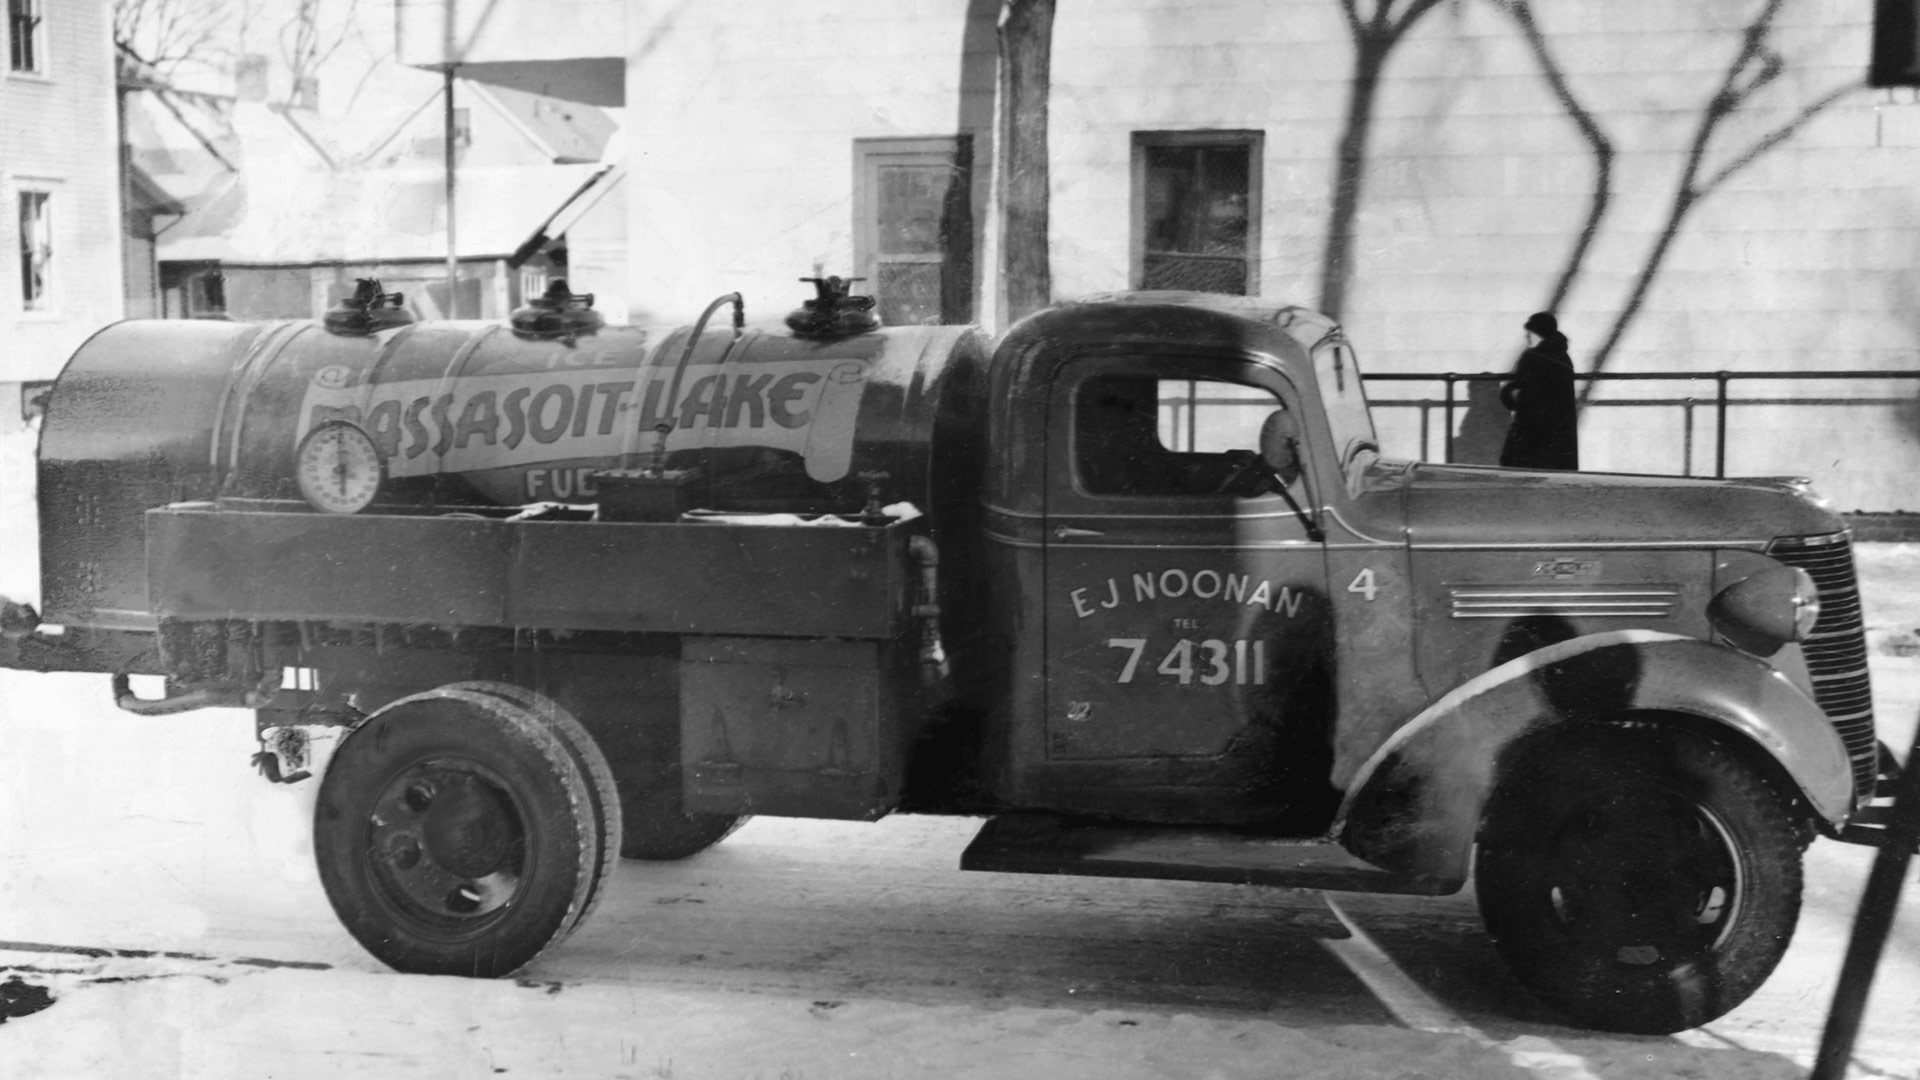 Second-generation owner Edward J. Noonan inaugurated the company name Massasoit Lake Ice and Fuel Co.